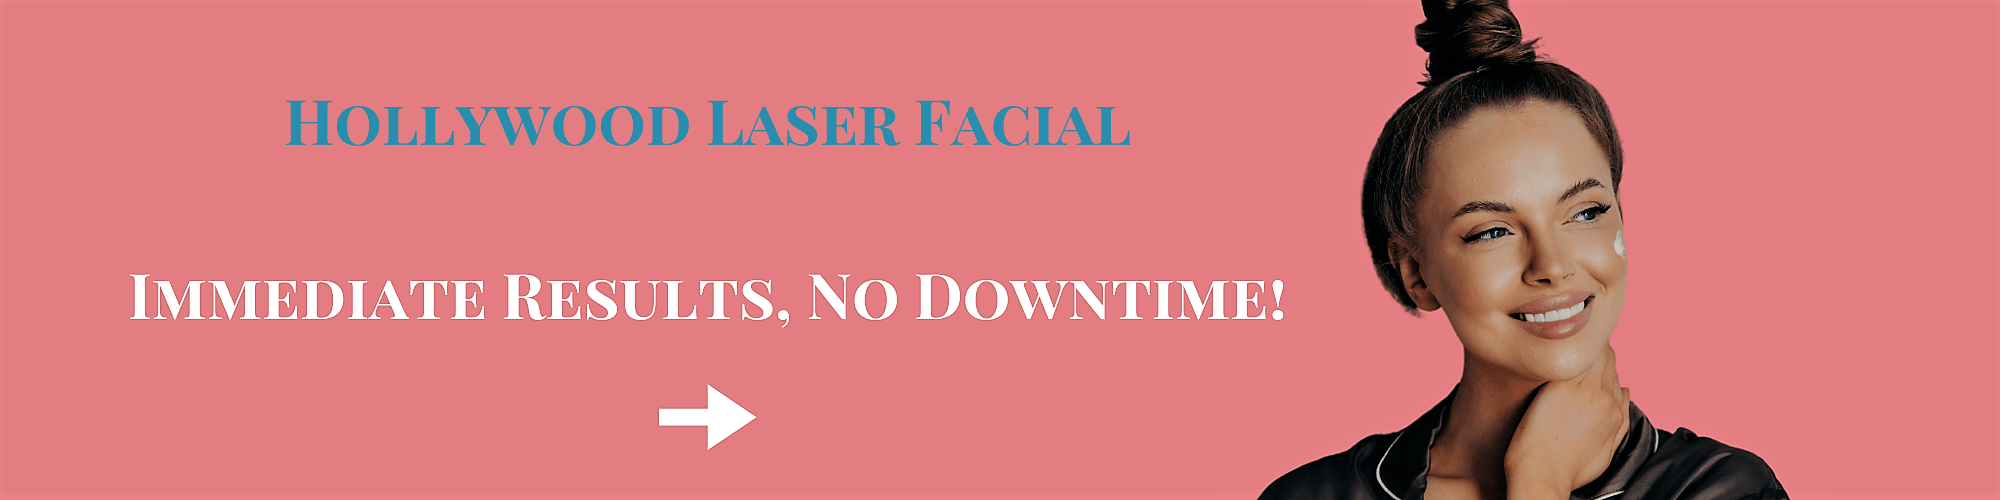 Hollywood Caron Laser Peel highlighting immediate results with no downtime. Features a content client post-treatment with glowing, refreshed skin.